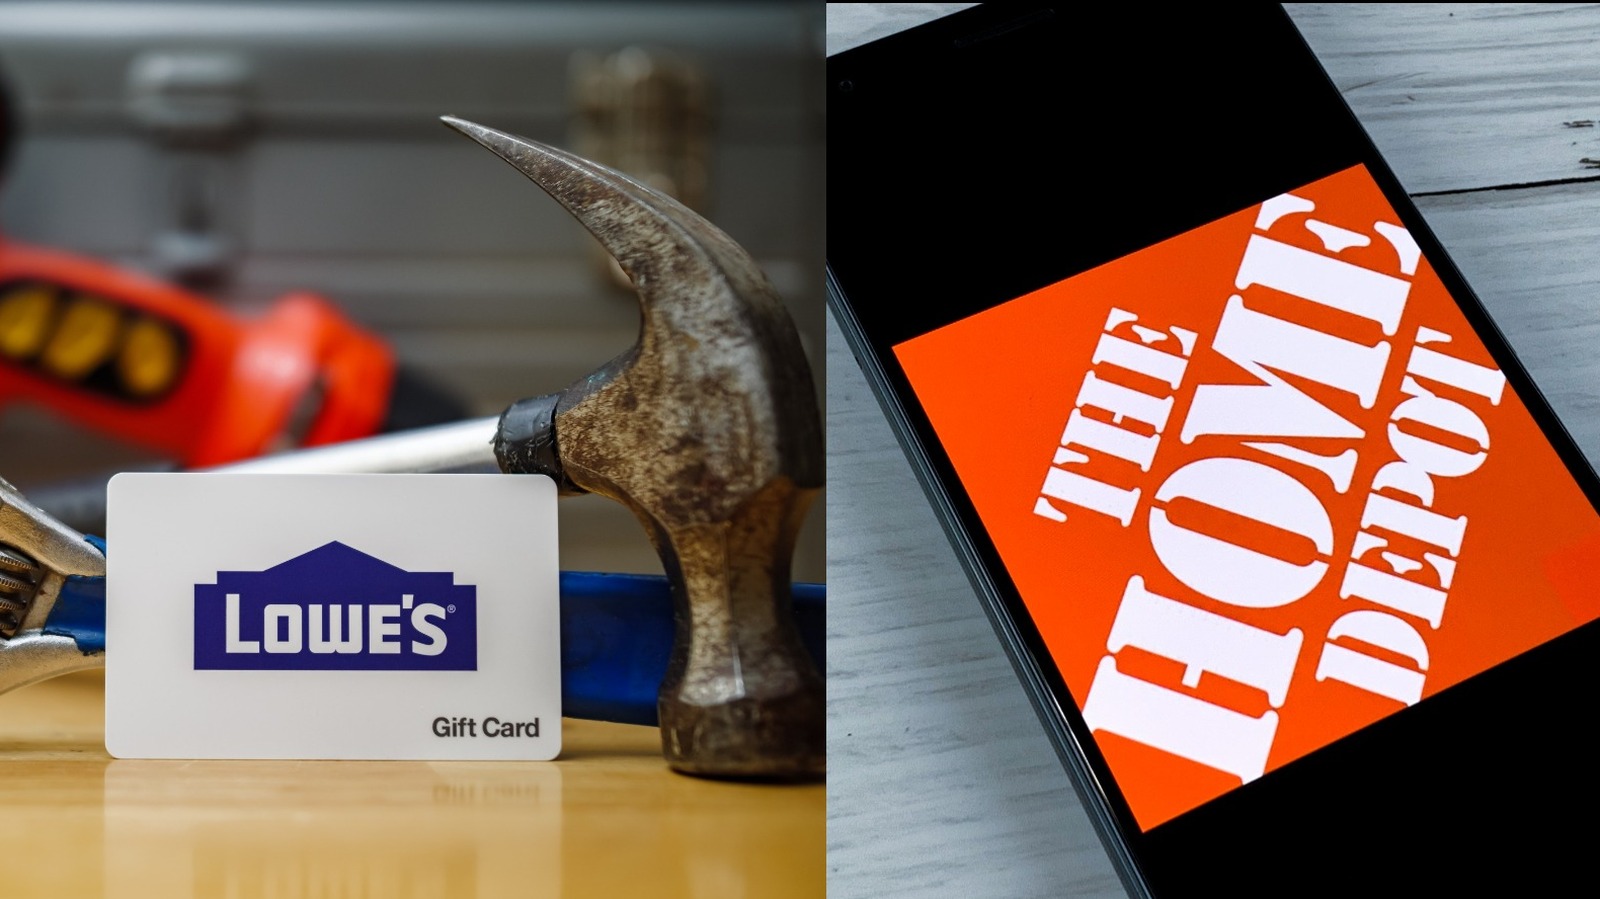 Comparing Home Improvement Retailers: Lowe's Vs Home Depot